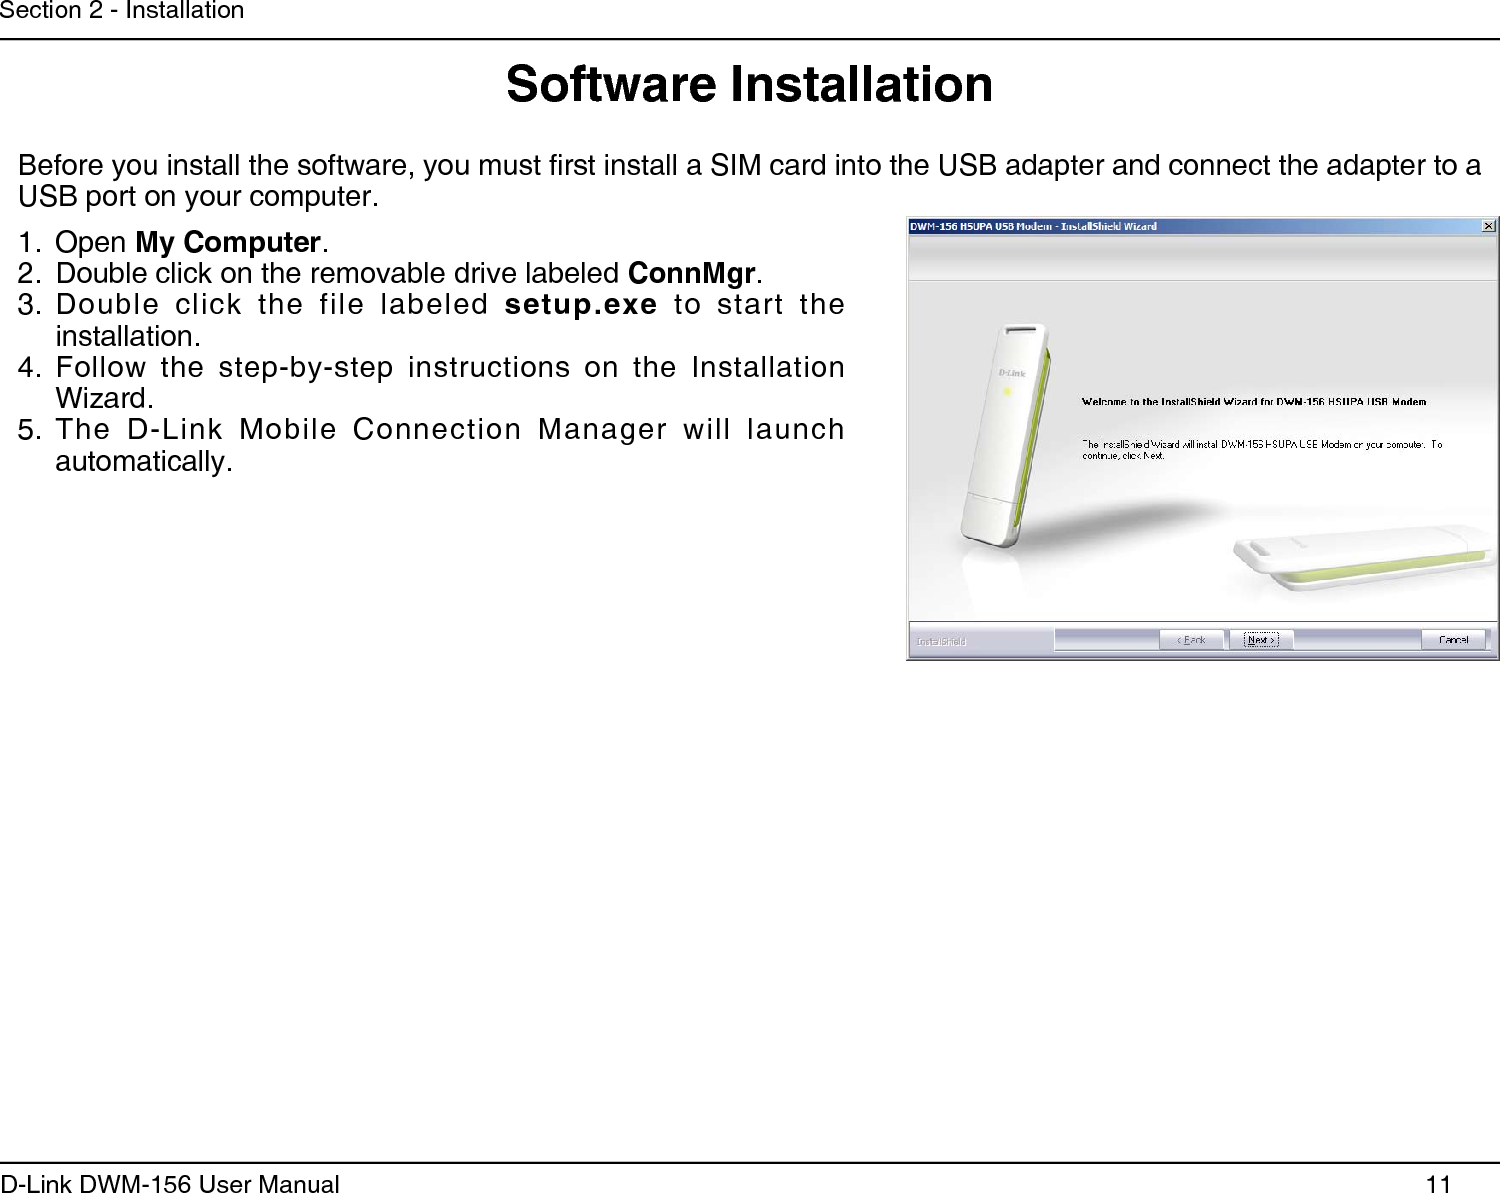 11D-Link DWM-156 User ManualSection 2 - InstallationOpen 1.  My Computer.Double click on the removable drive labeled 2.  ConnMgr.Double  click  the  file  labeled 3.  setup.exe  to  start  the installation.Follow  the  step-by-step  instructions  on  the  Installation 4. Wizard.The  D-Link  Mobile  Connection  Manager  will  launch 5. automatically.Software InstallationBefore you install the software, you must rst install a SIM card into the USB adapter and connect the adapter to a USB port on your computer.